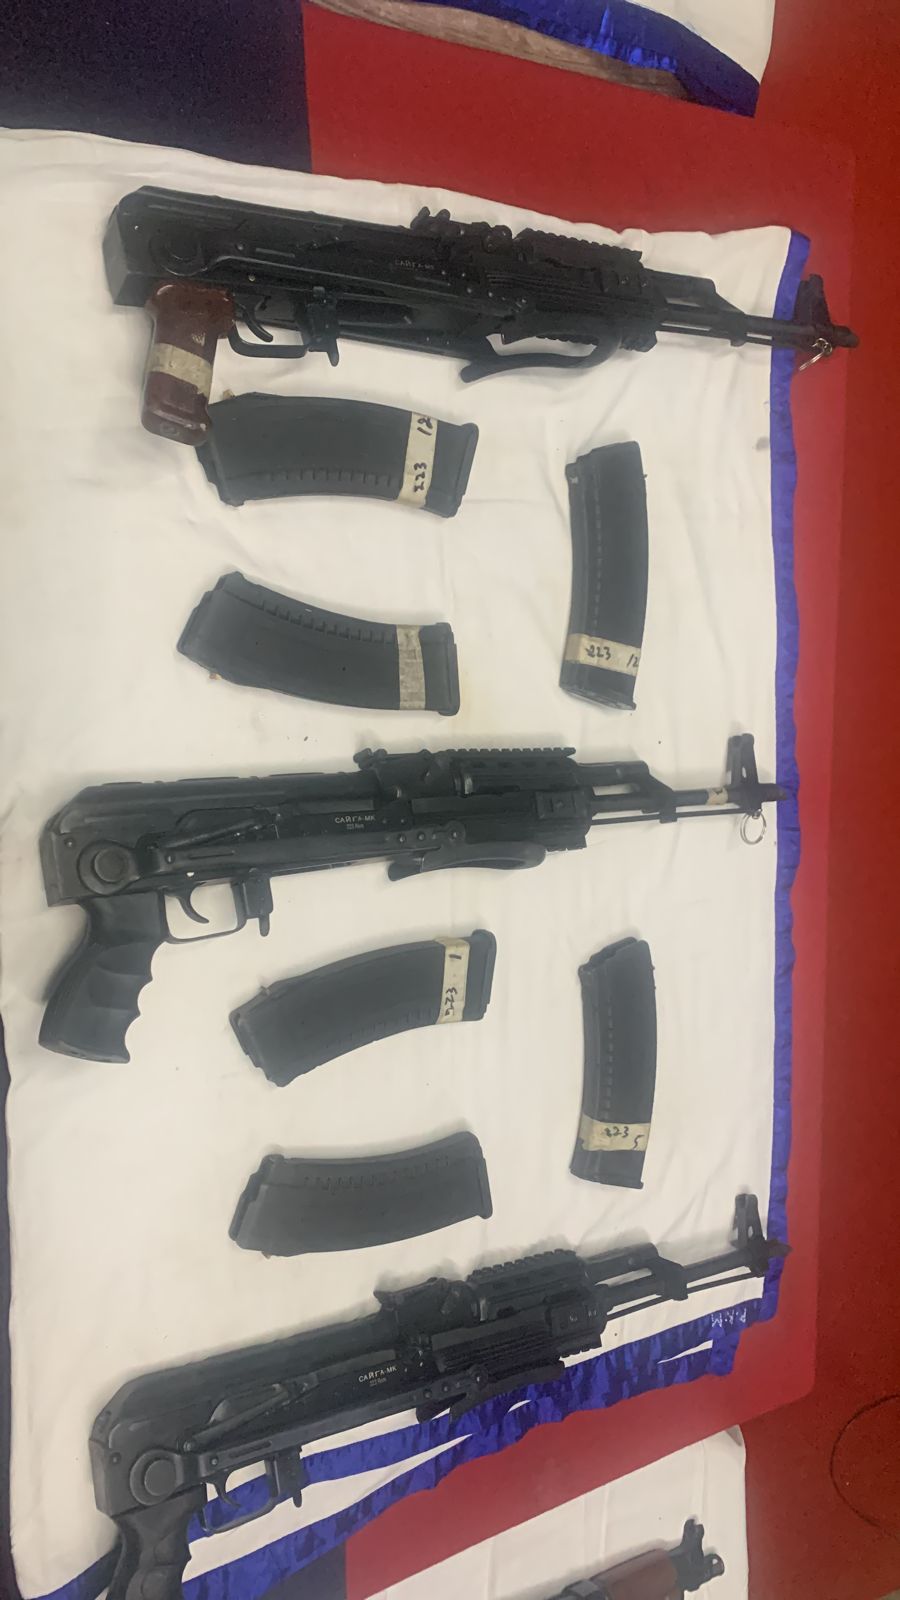 BSF seizes cache of arms and ammunition in Punjab's Ferozepur sector